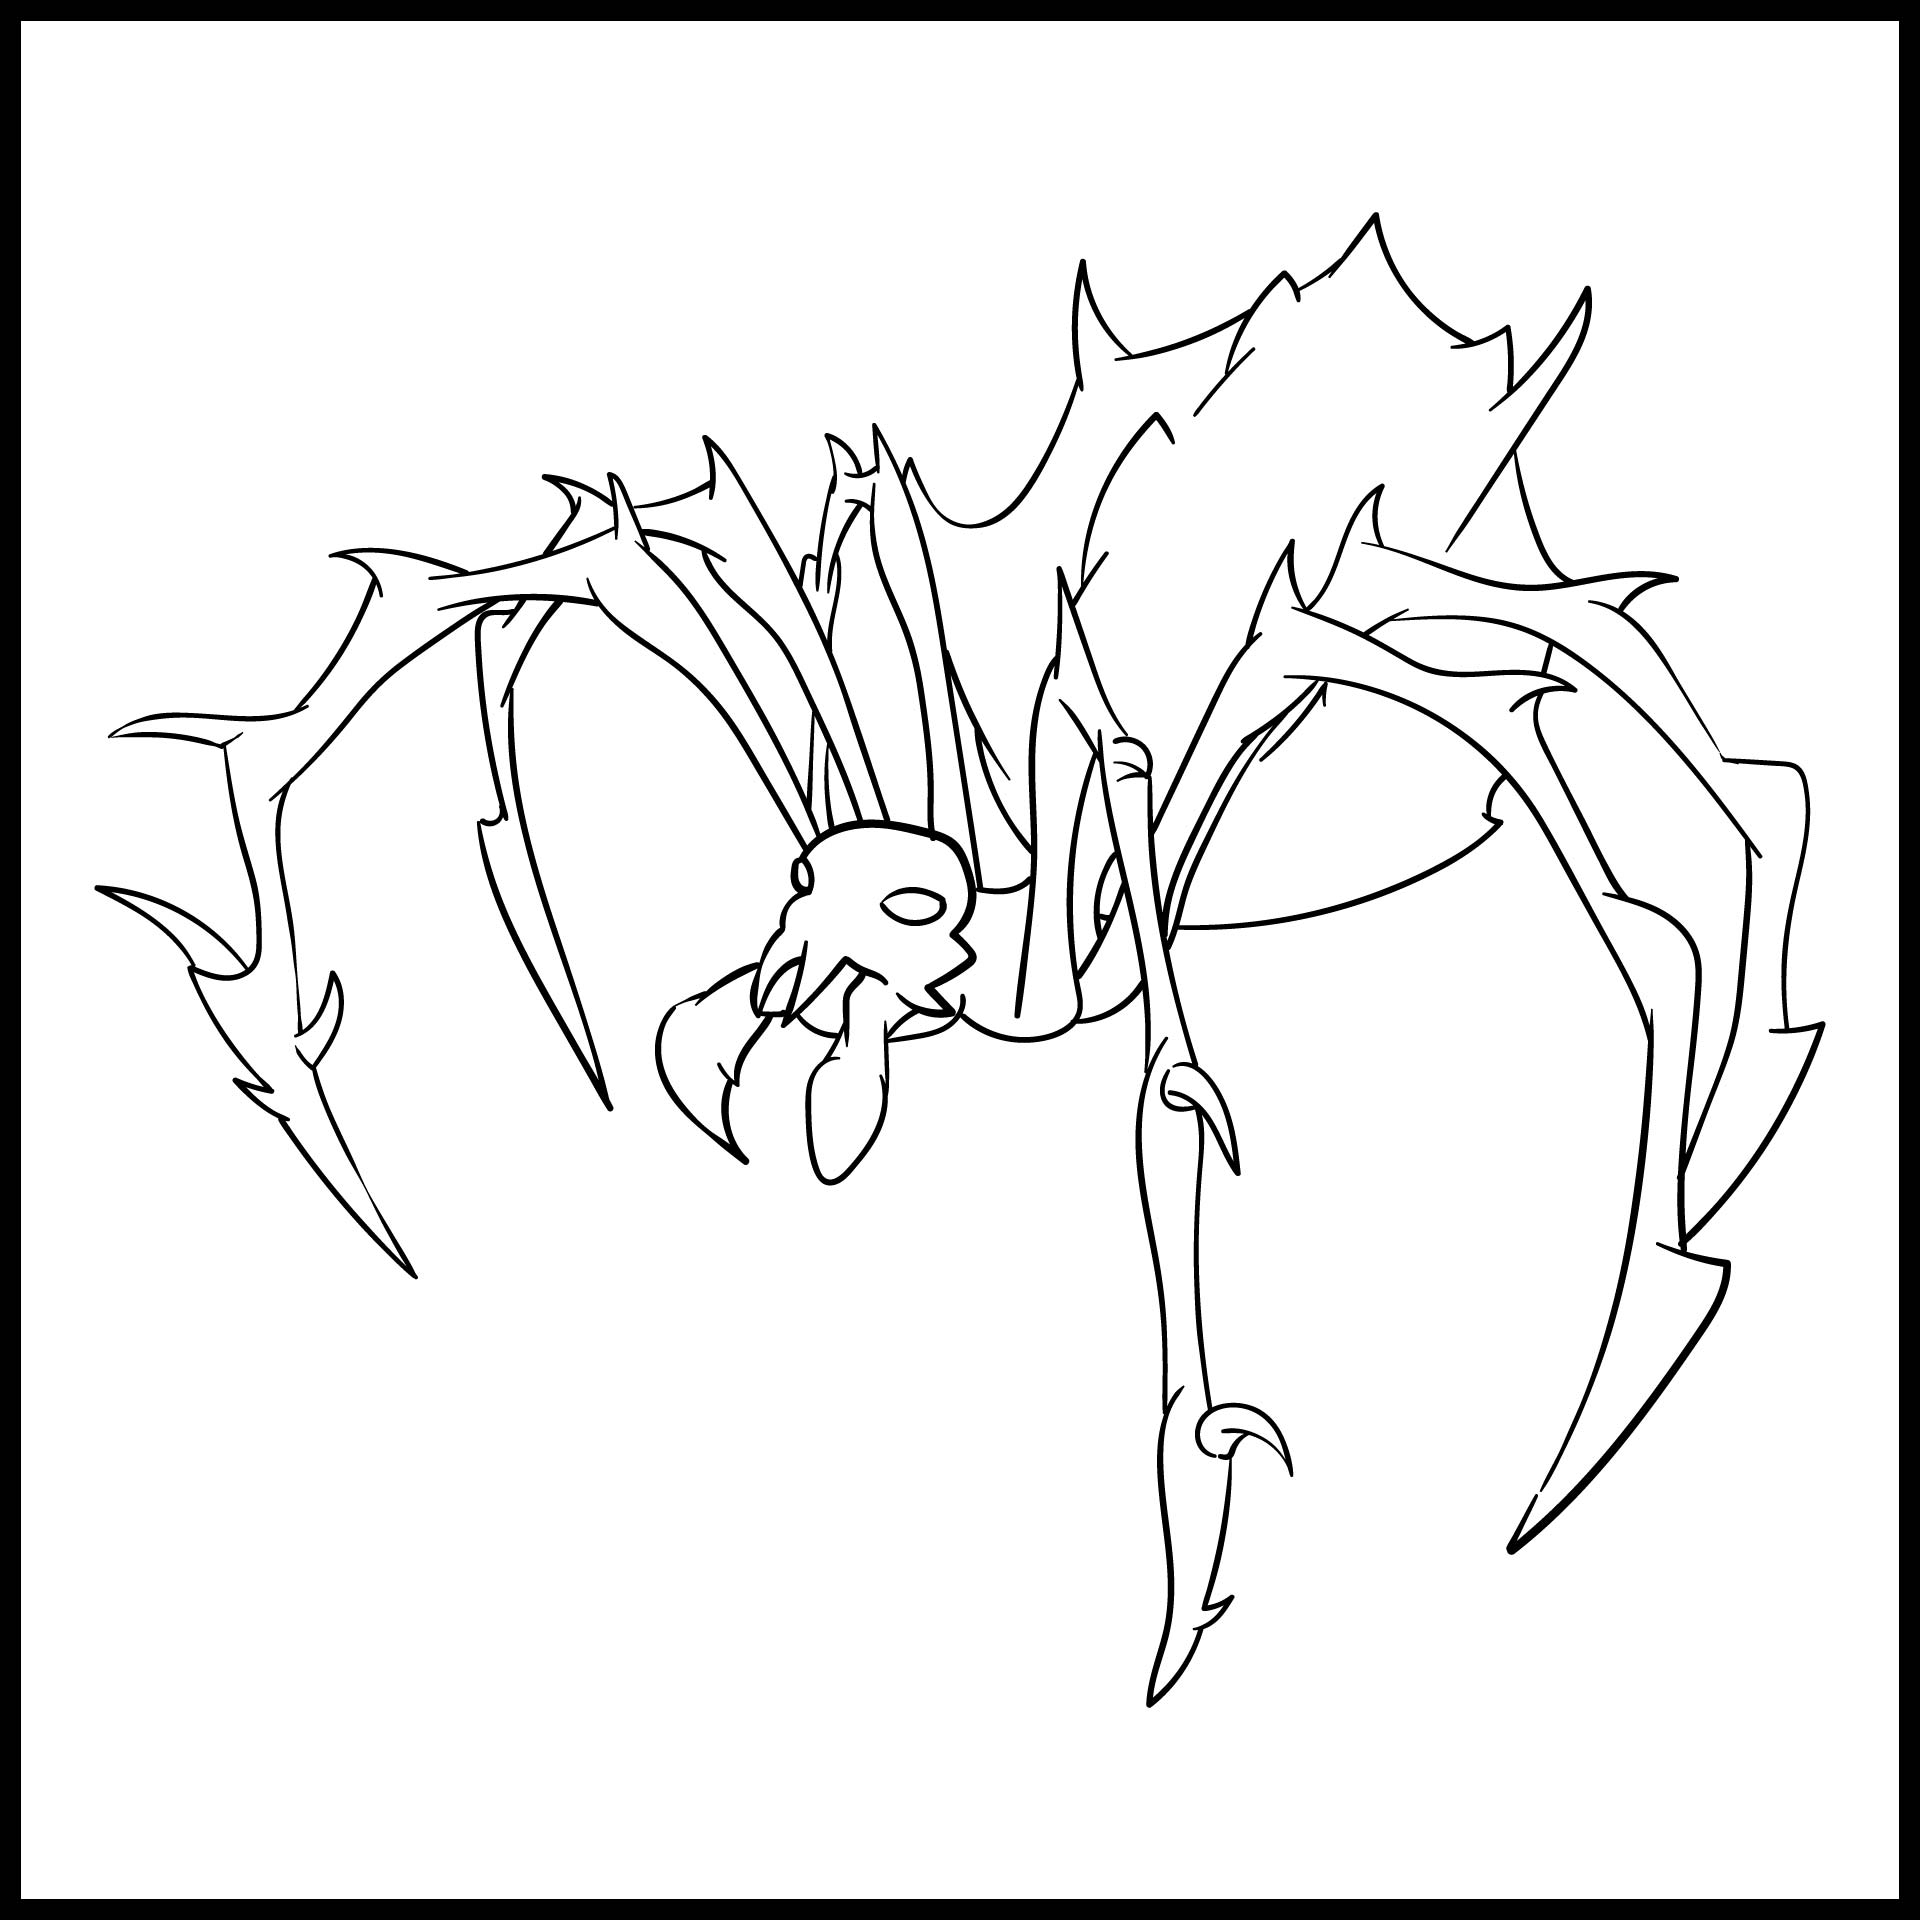 Printable Scary Spider Coloring Page